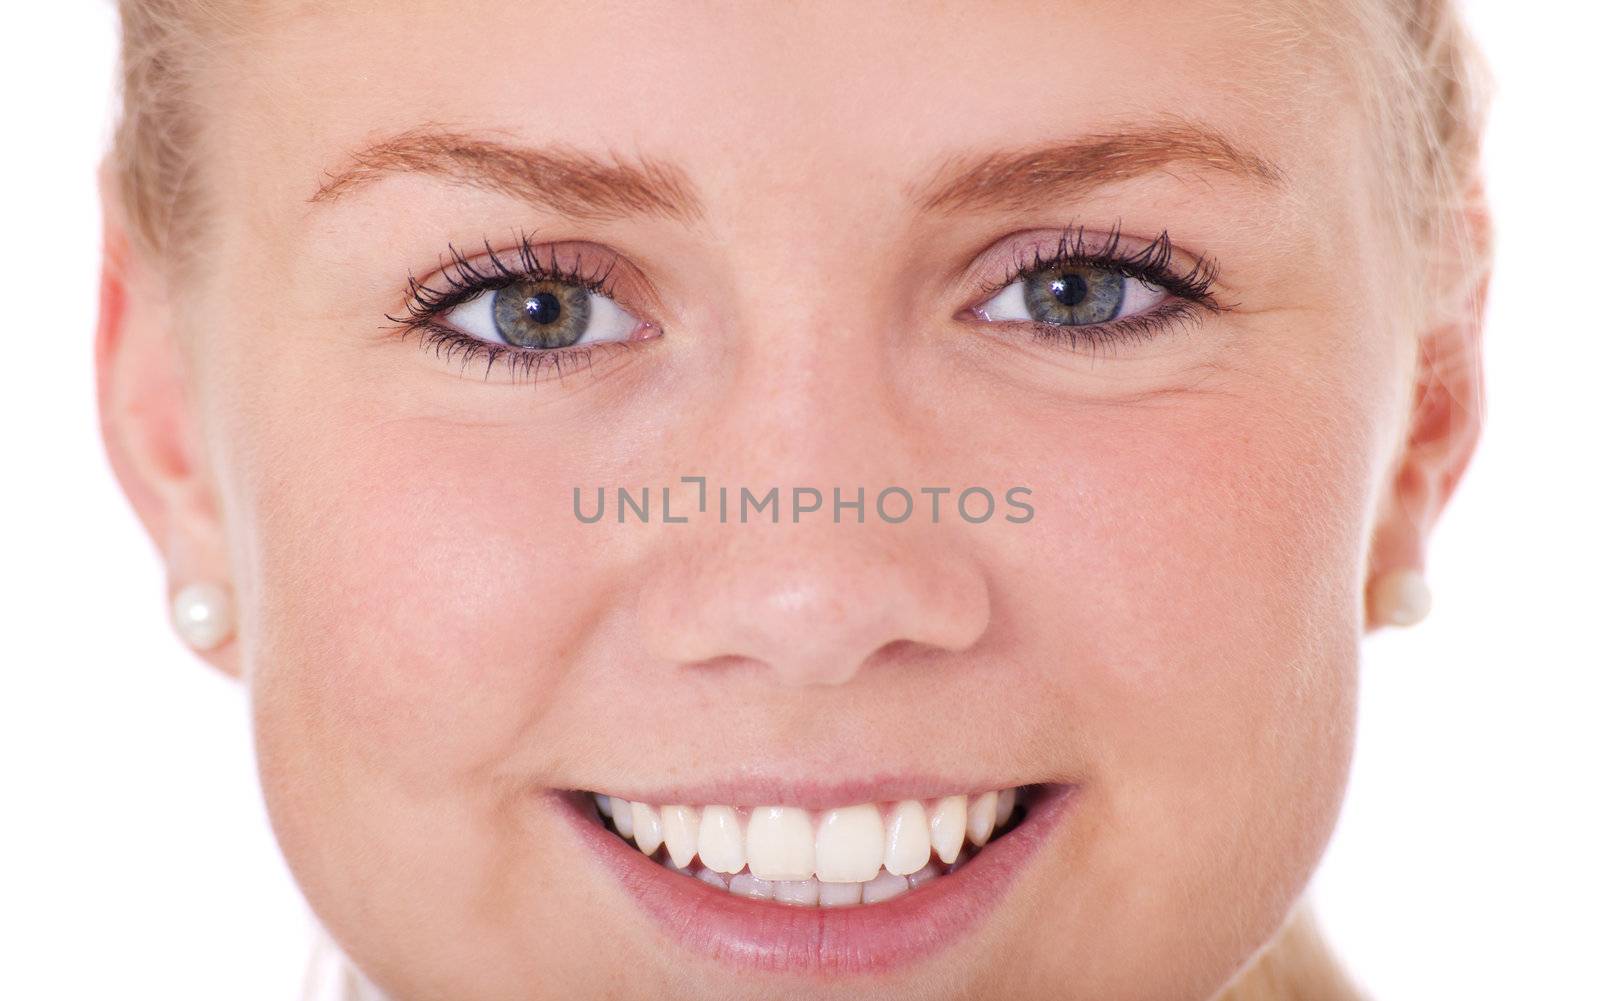 Attractive young woman smiling. All on white background.